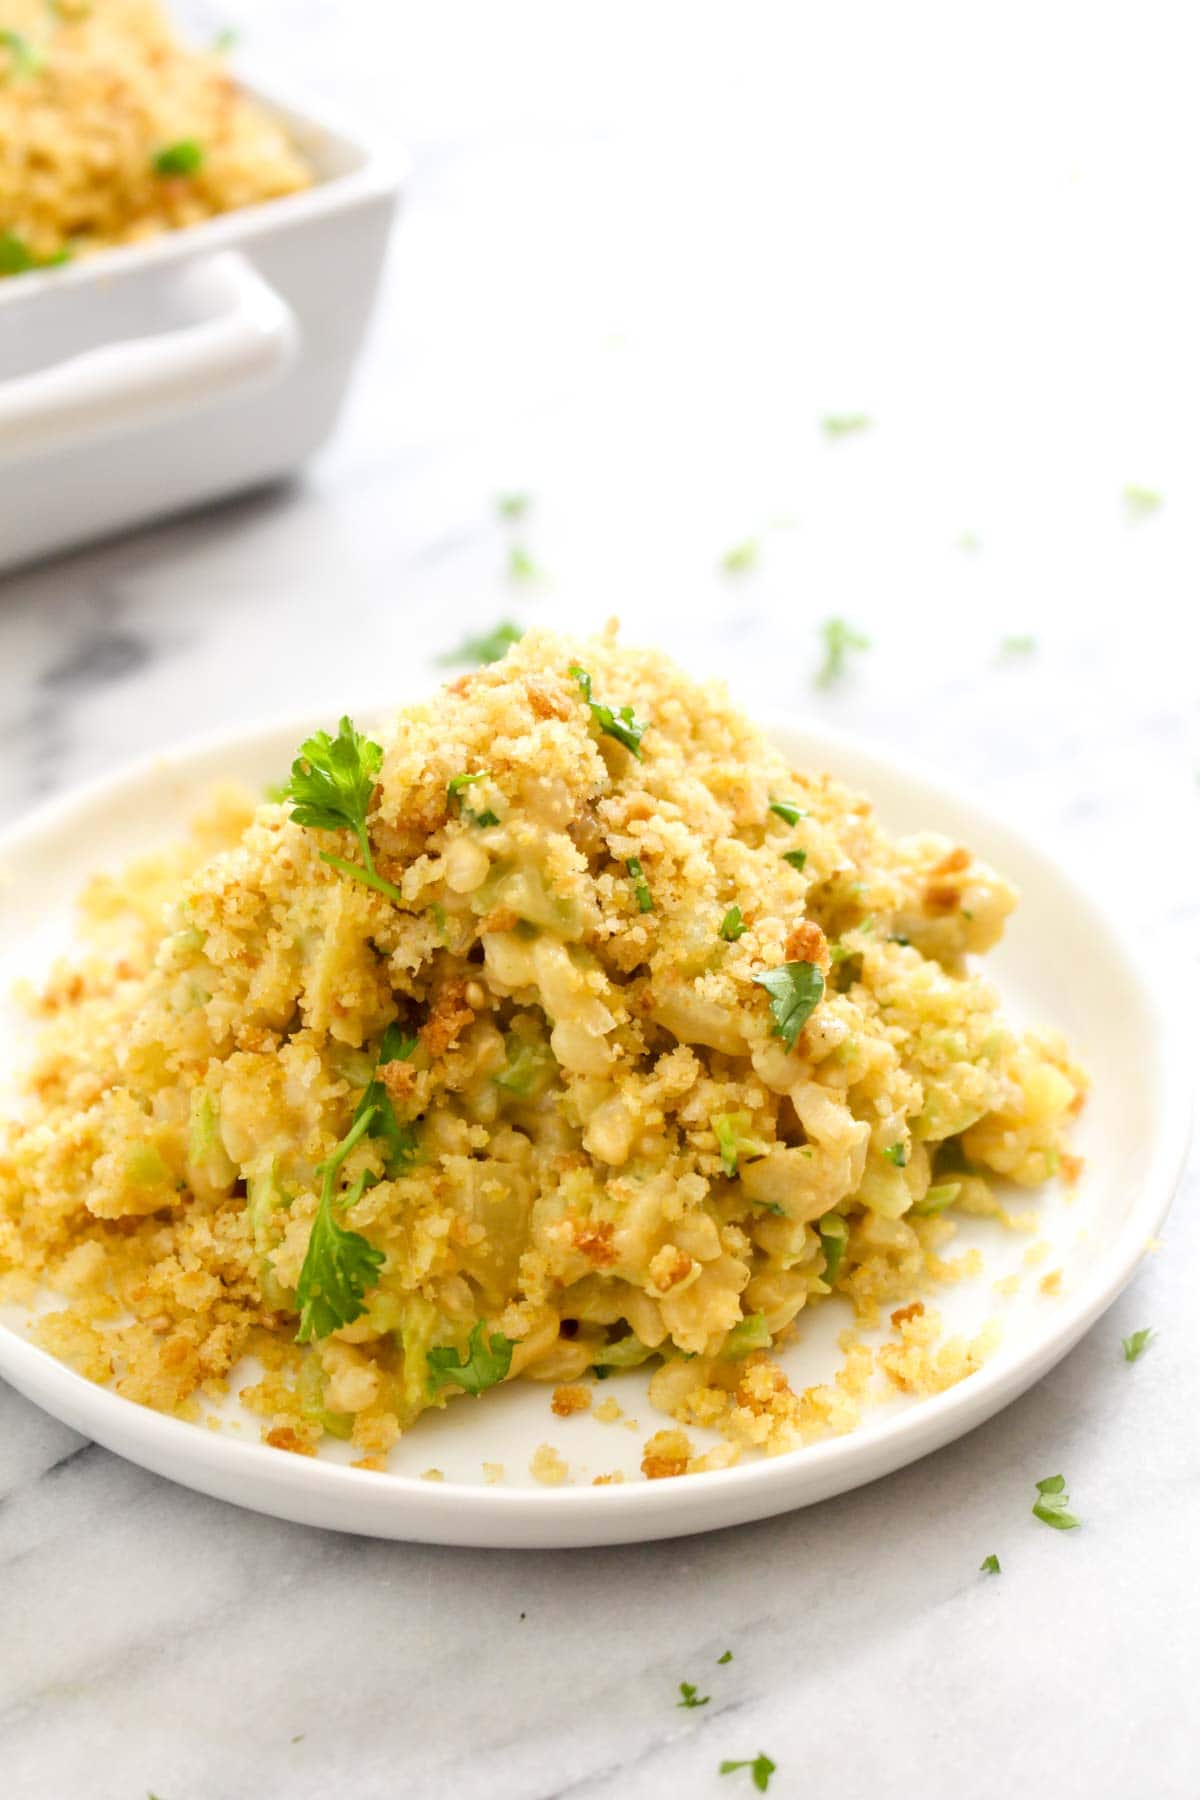 This Cheesy Broccoli Rice Casserole is a hearty and creamy dish that satisfies that itch for comfort food while being completely healthy, gluten-free, and vegan! This quick dish only takes 30 minutes to make, including the time it takes to whip up the cheese sauce. | CatchingSeeds.com